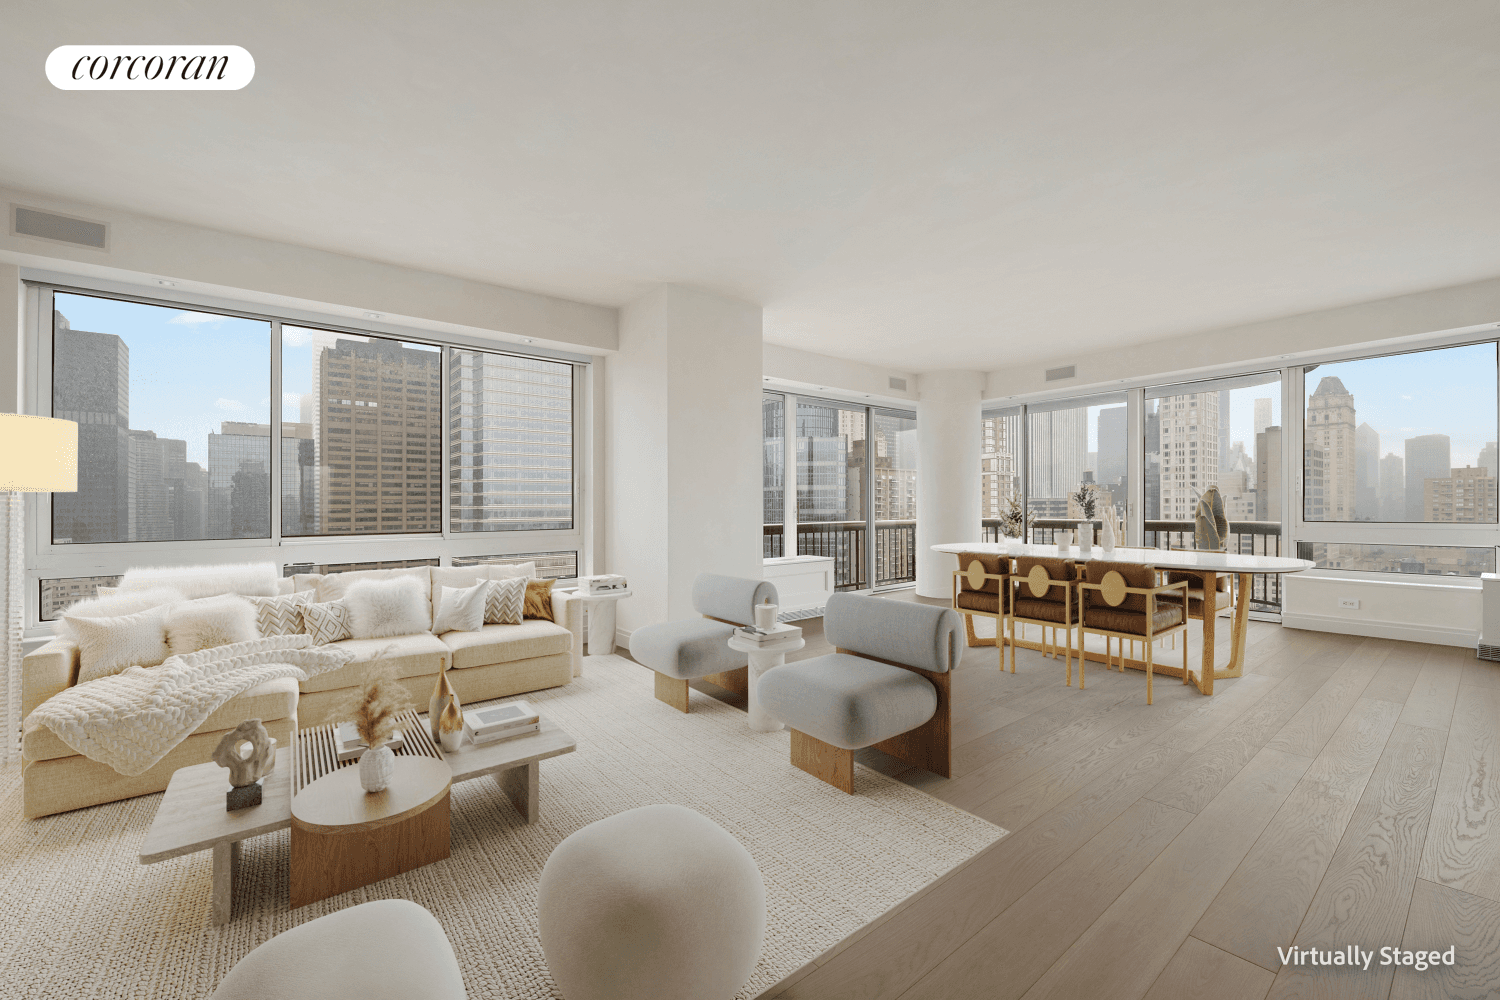 Be the first to live in this Upper East Side gem 3600 sq ft of luxury living at 167 East 61st Street, apartment 28BCDEmbrace unparalleled luxury of this spacious residence.